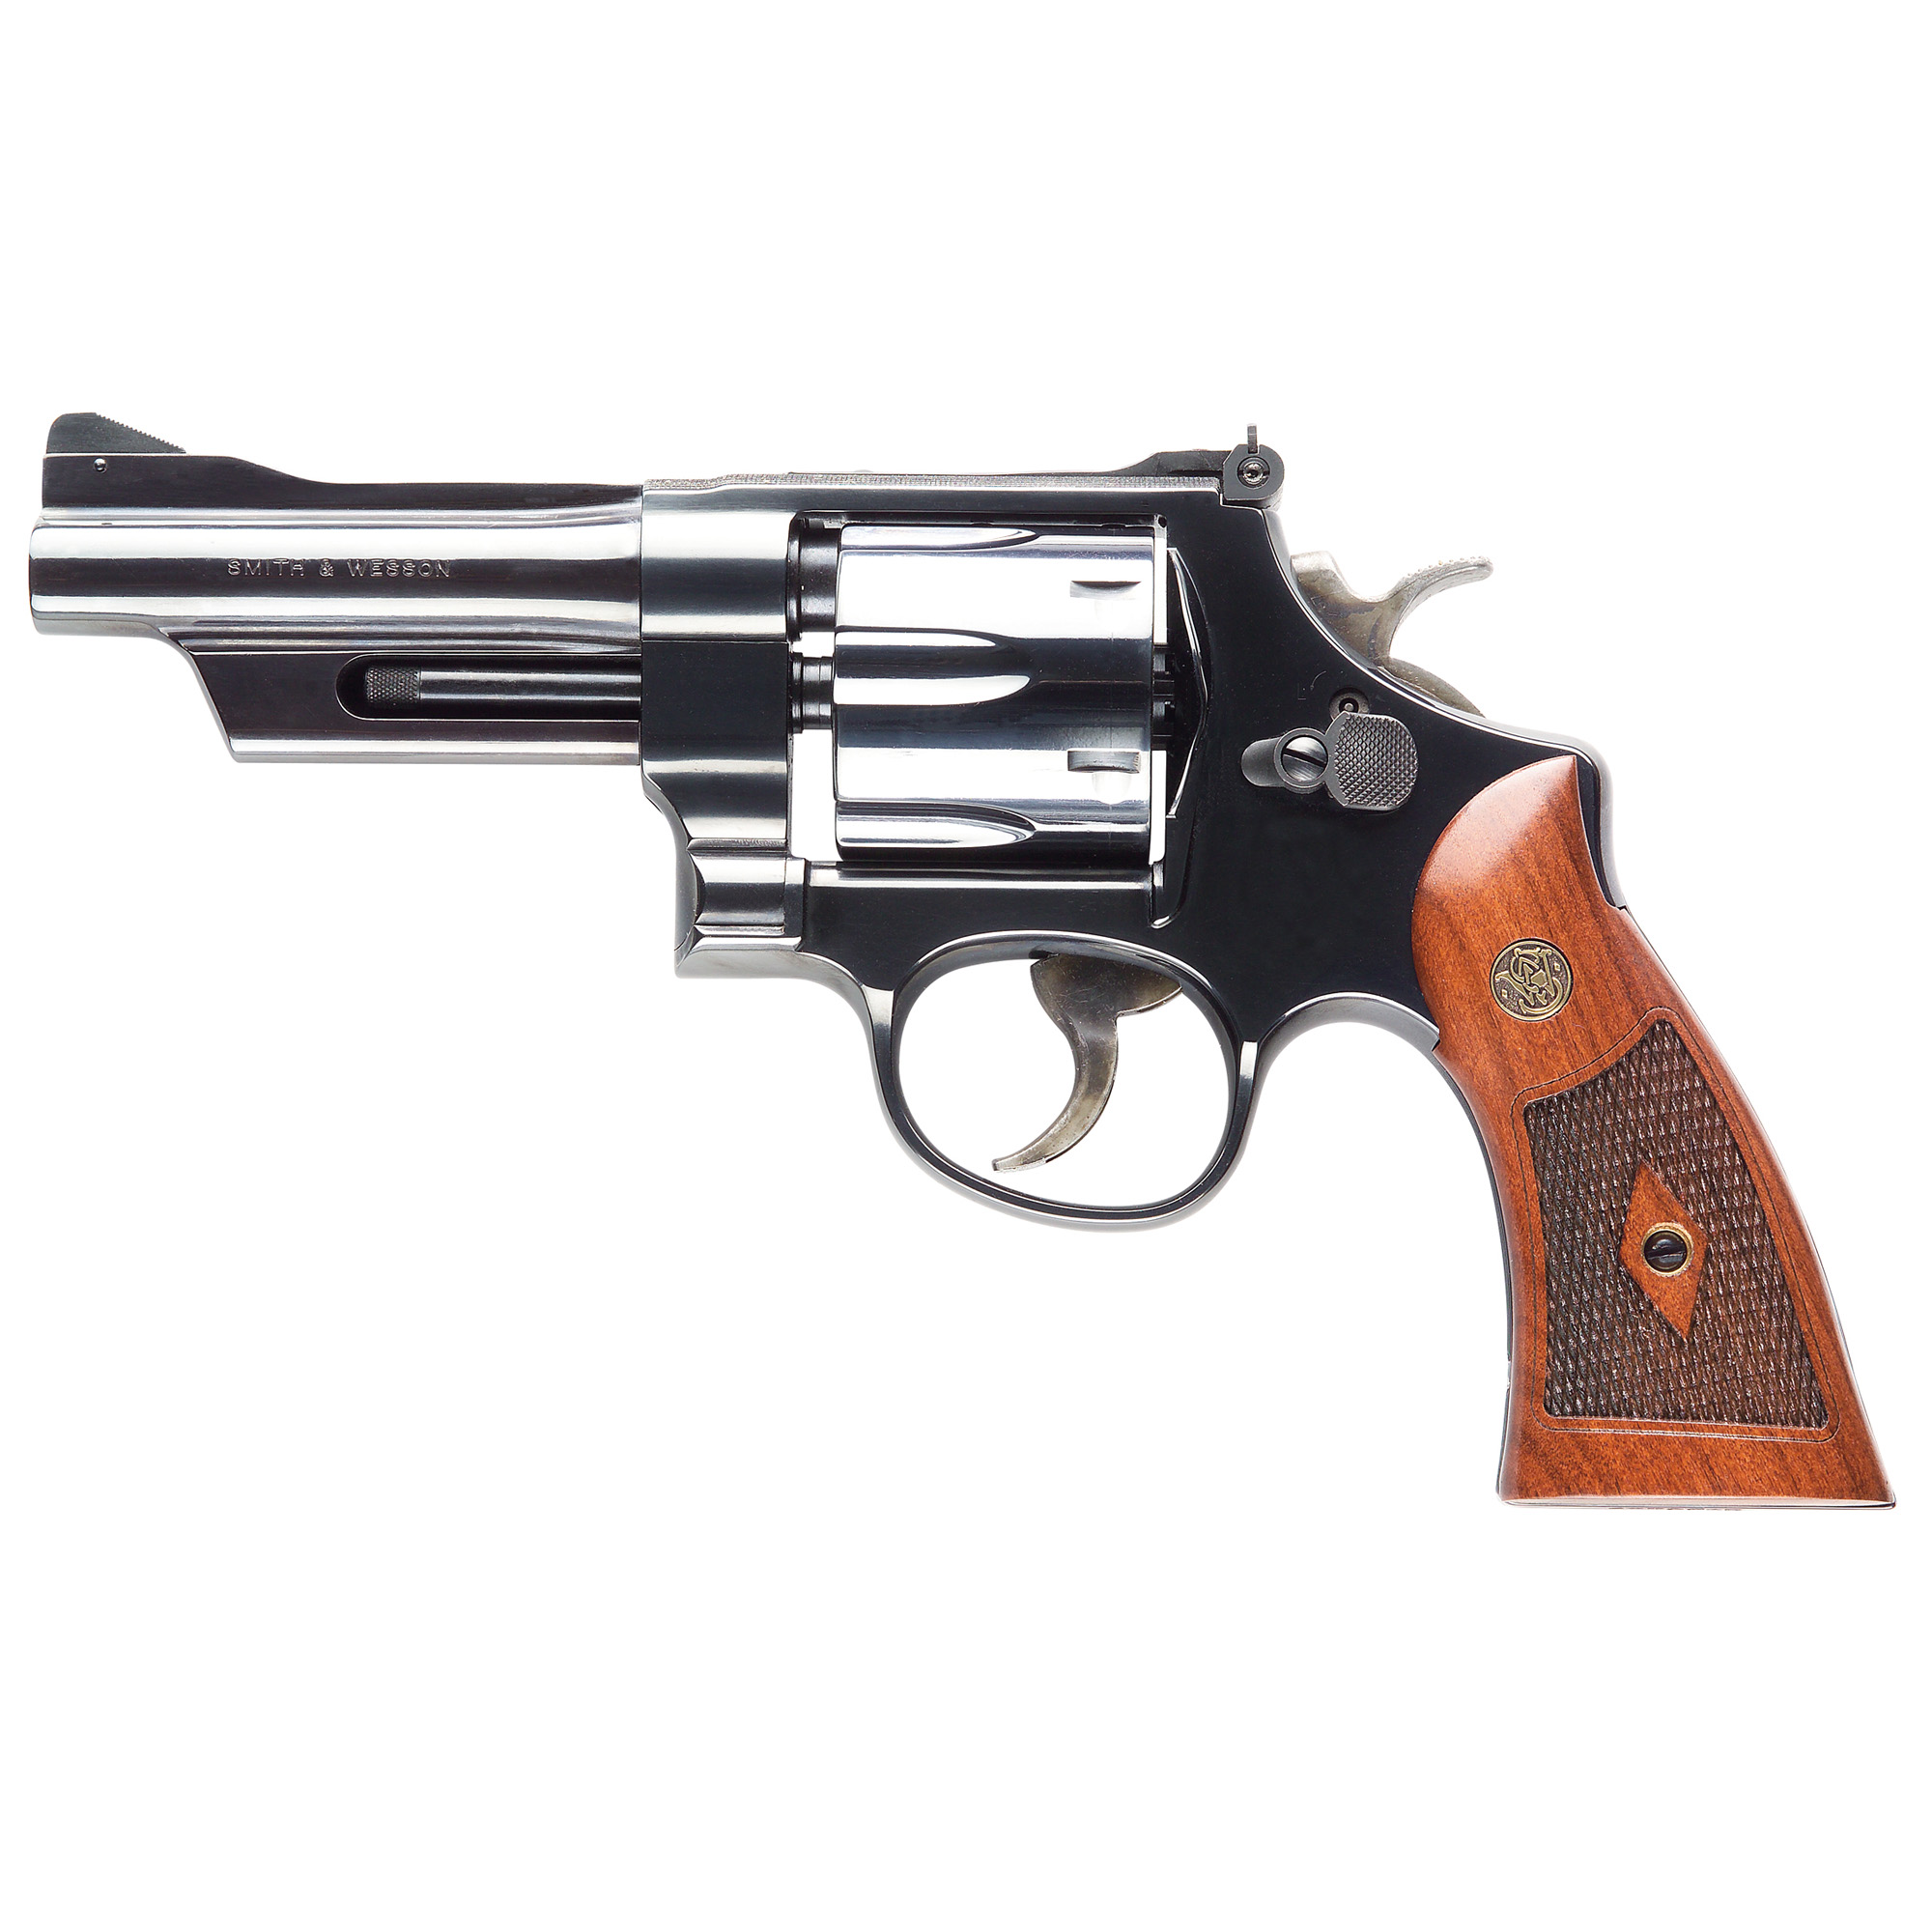 S&W 27 CLASSIC 357MAG 4 BL 6RD